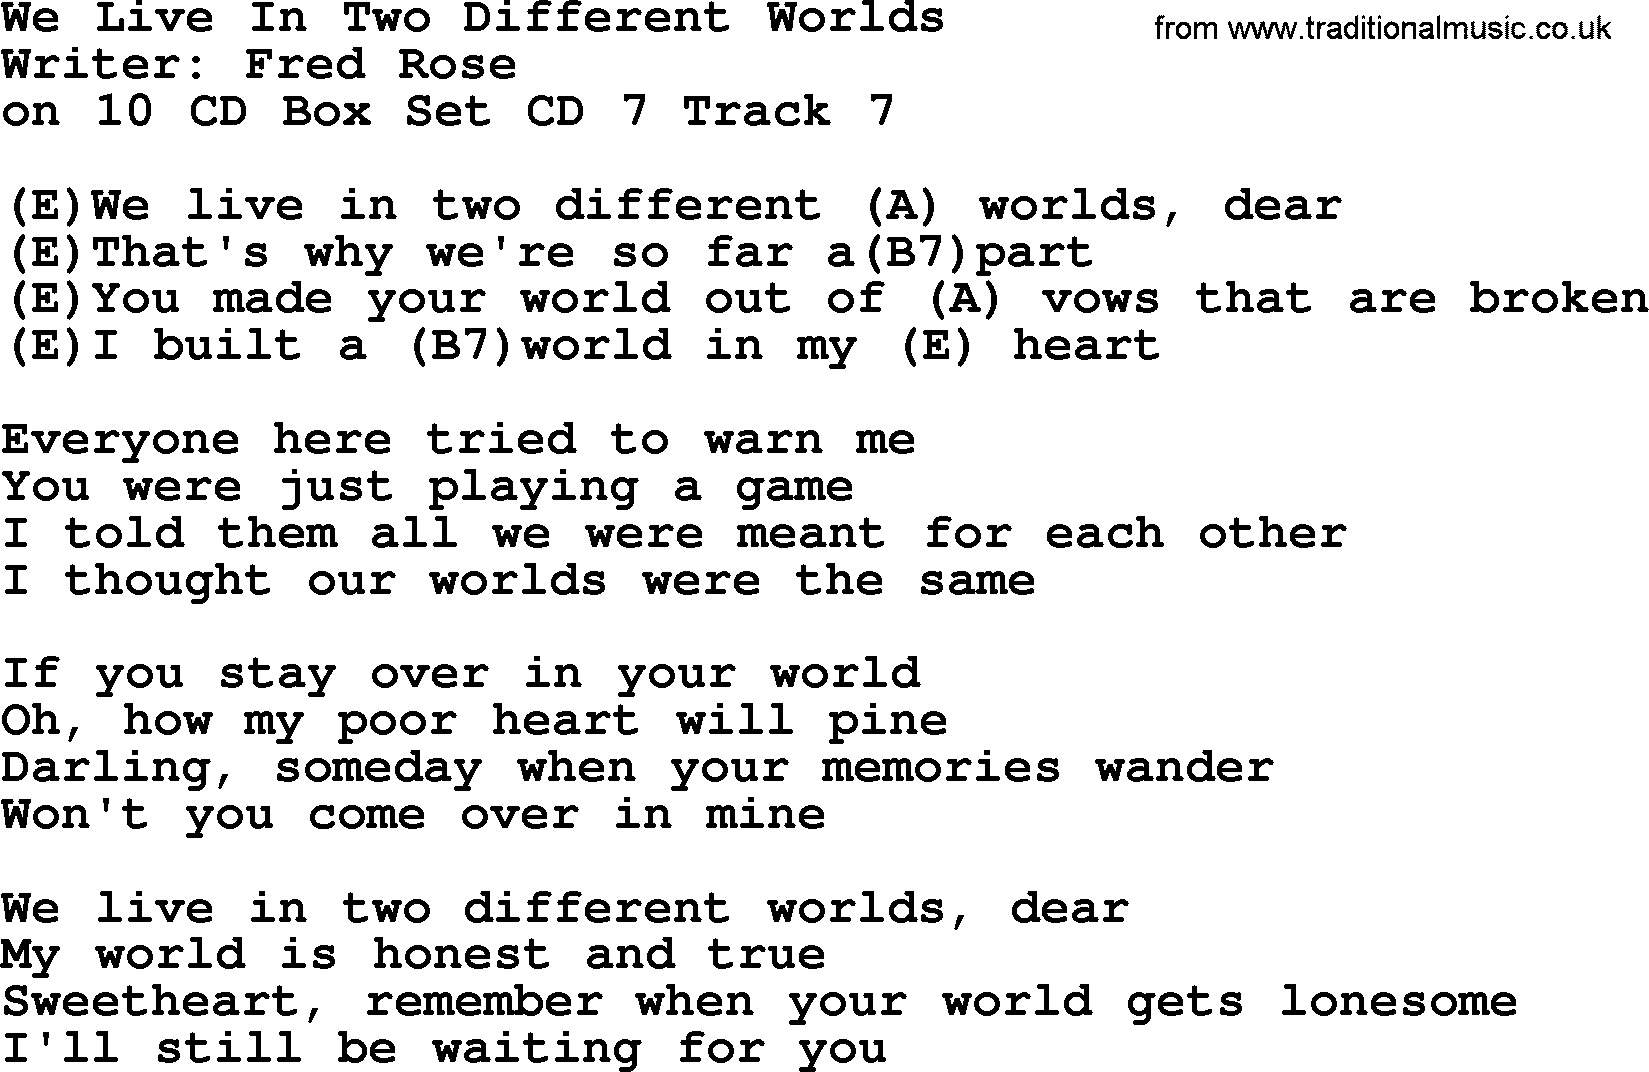 Hank Williams song We Live In Two Different Worlds, lyrics and chords